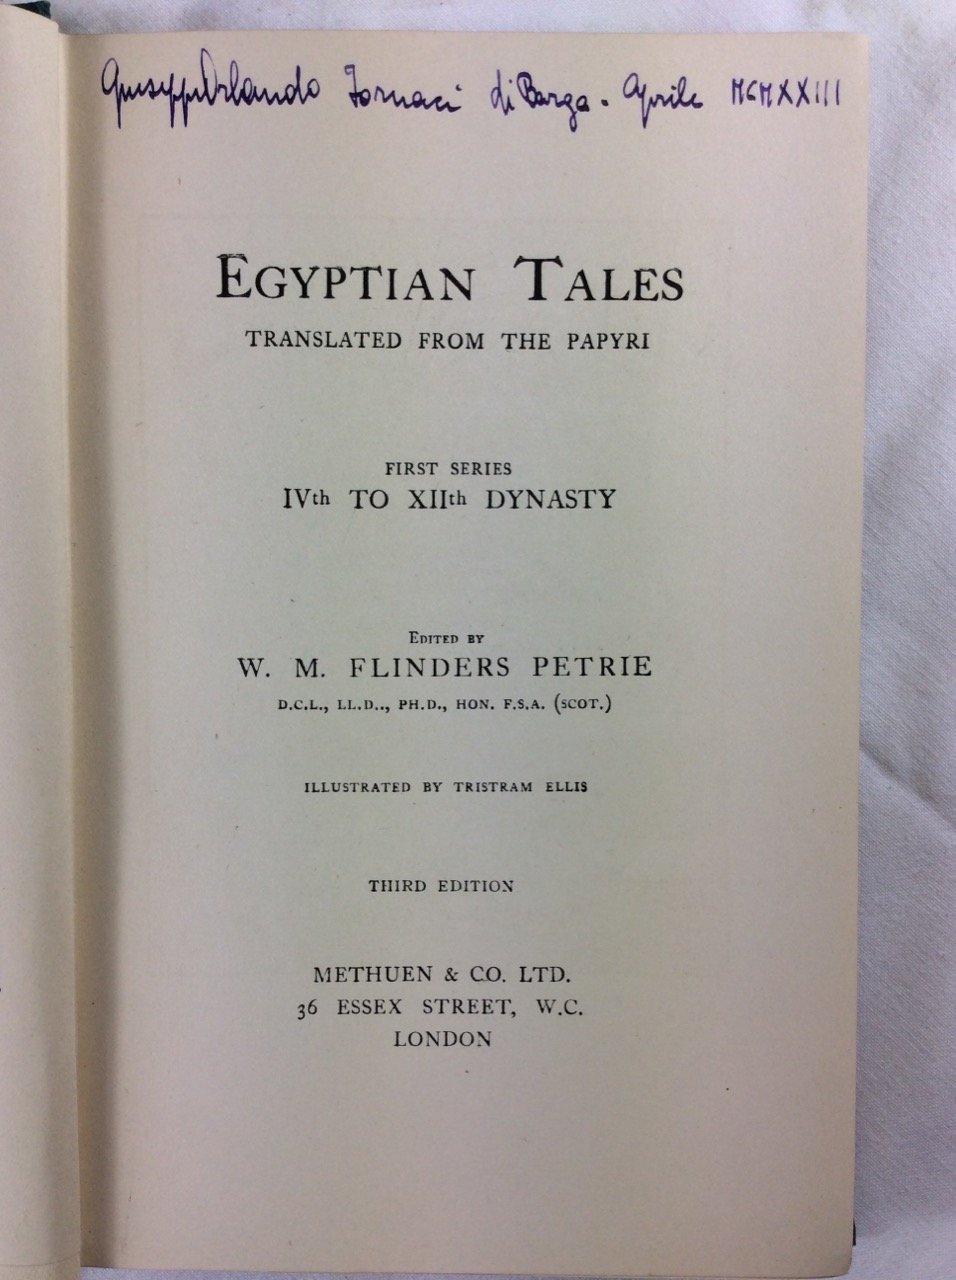 EGYPTIAN TALES. - Translated from the Papiri. Illustrated by Tristram …